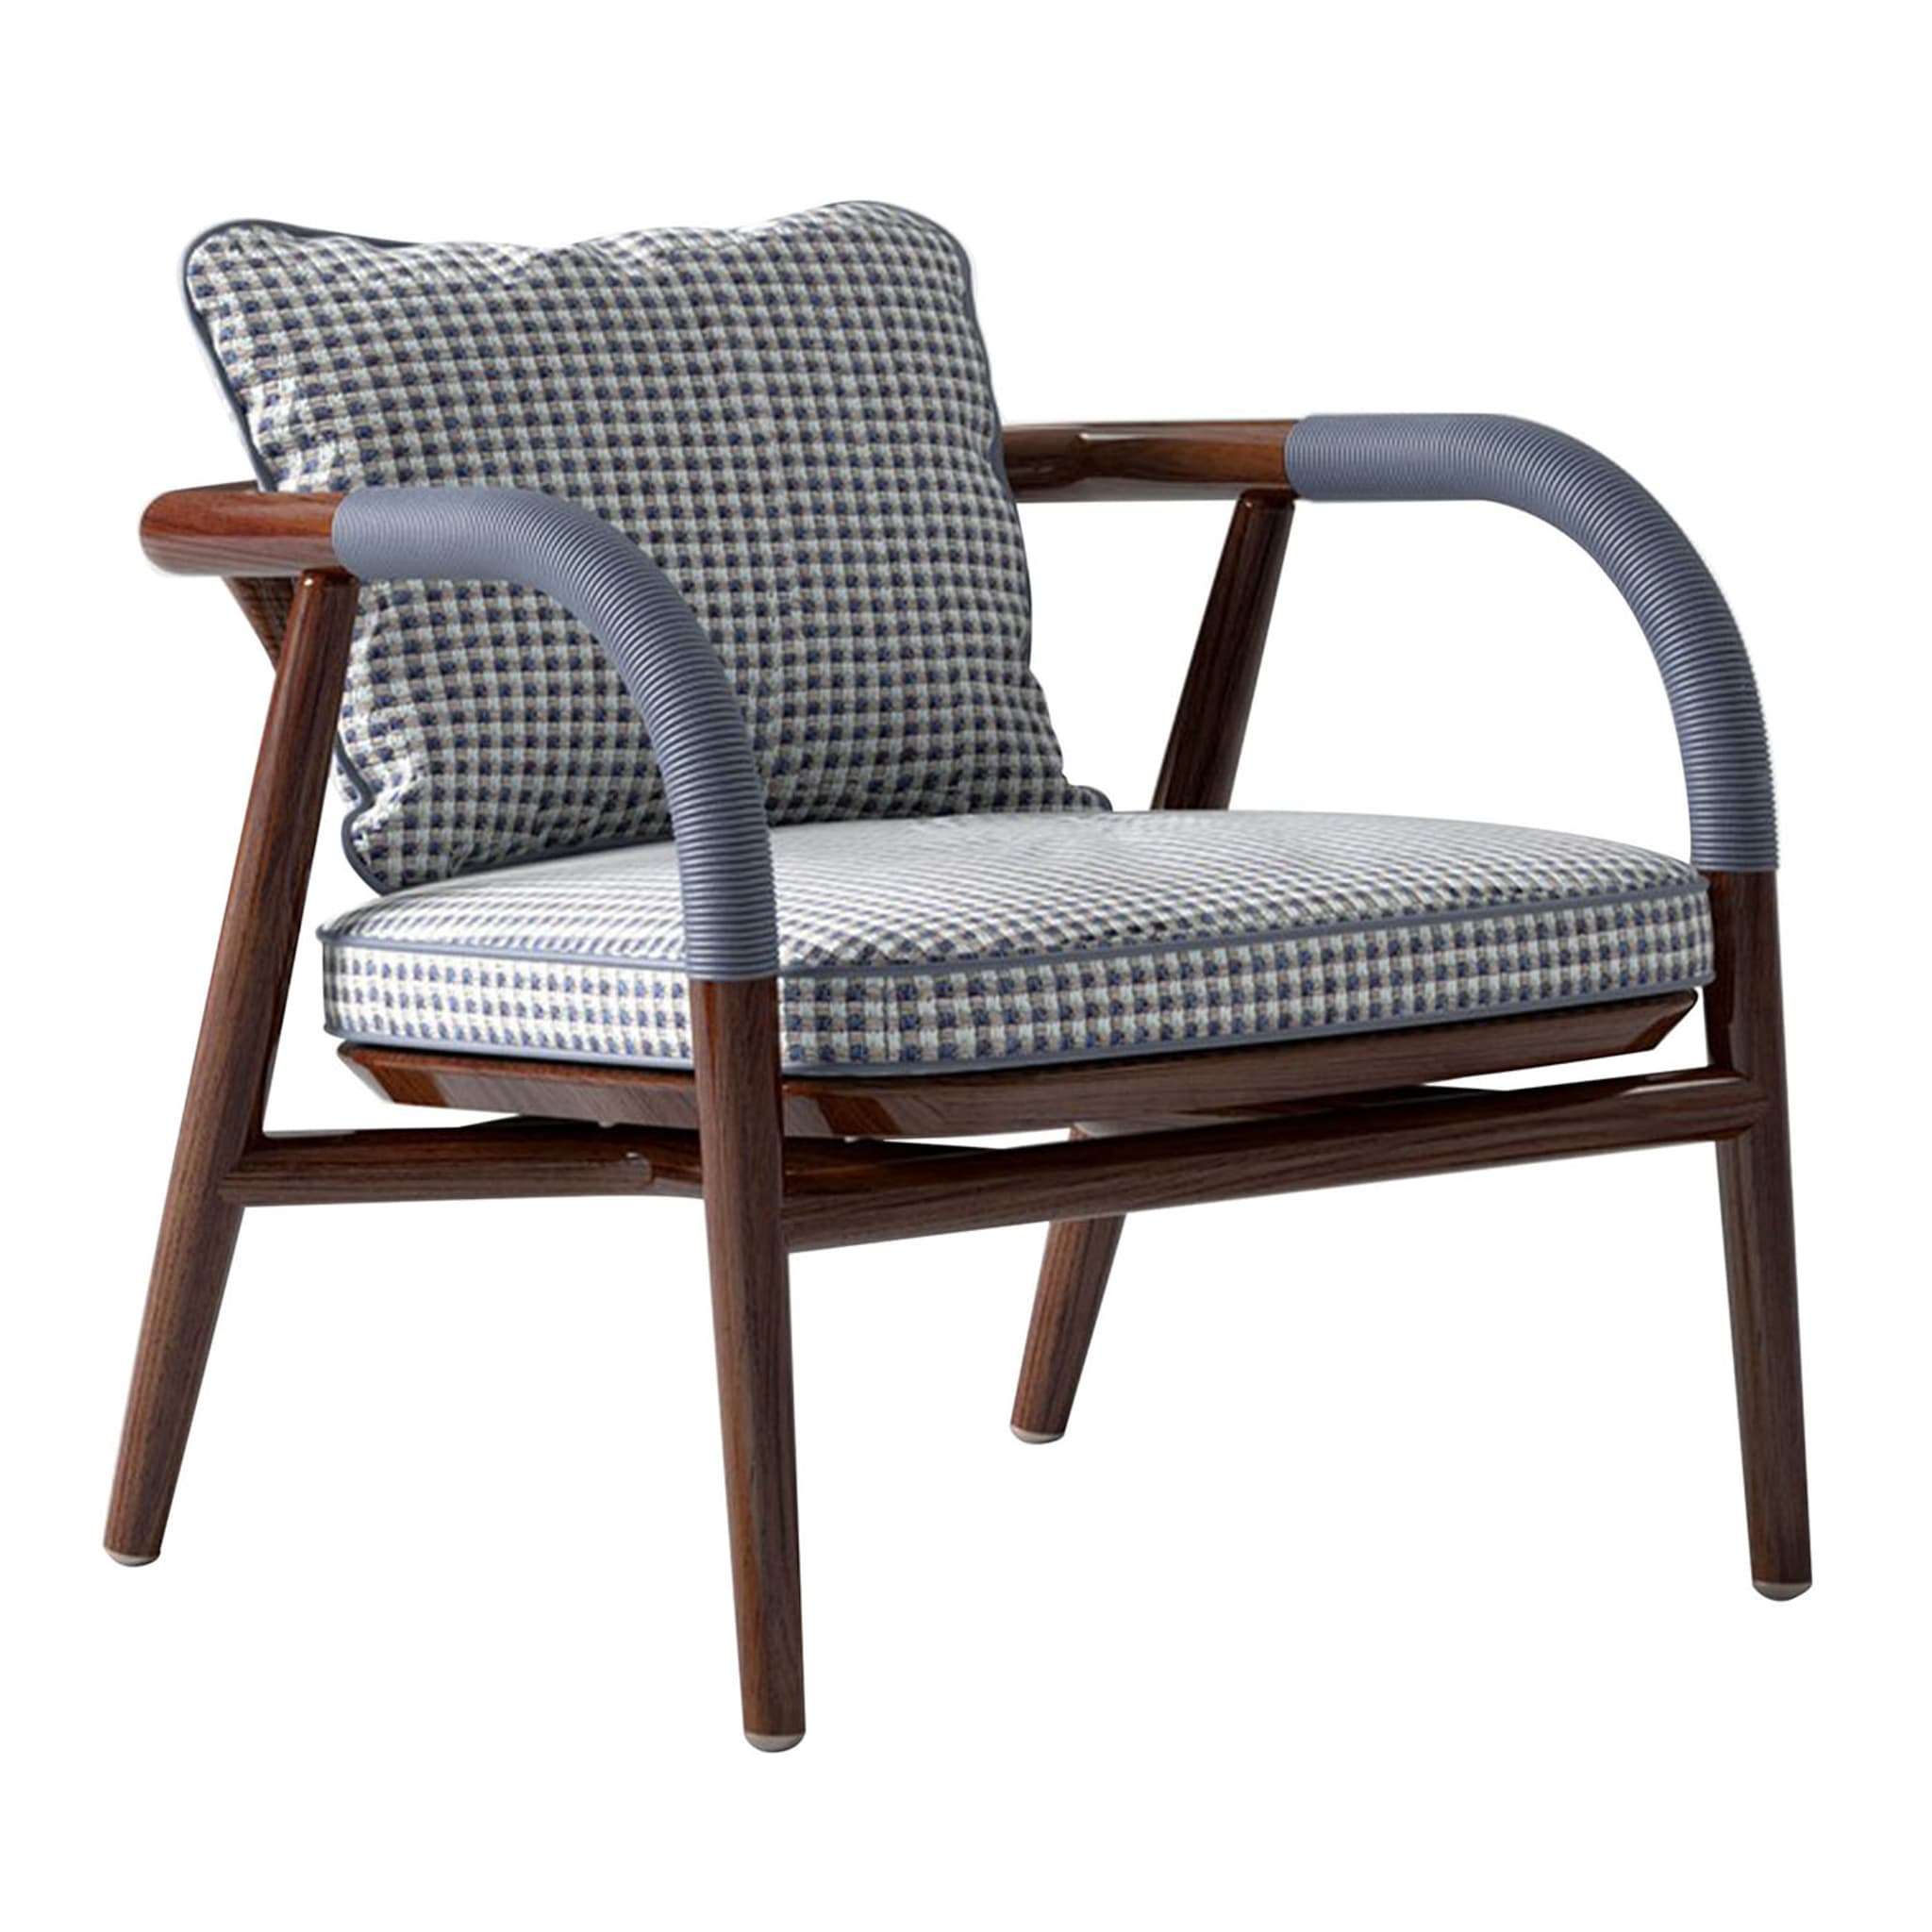  Wood Lounge Chair With Metal Details - Main view